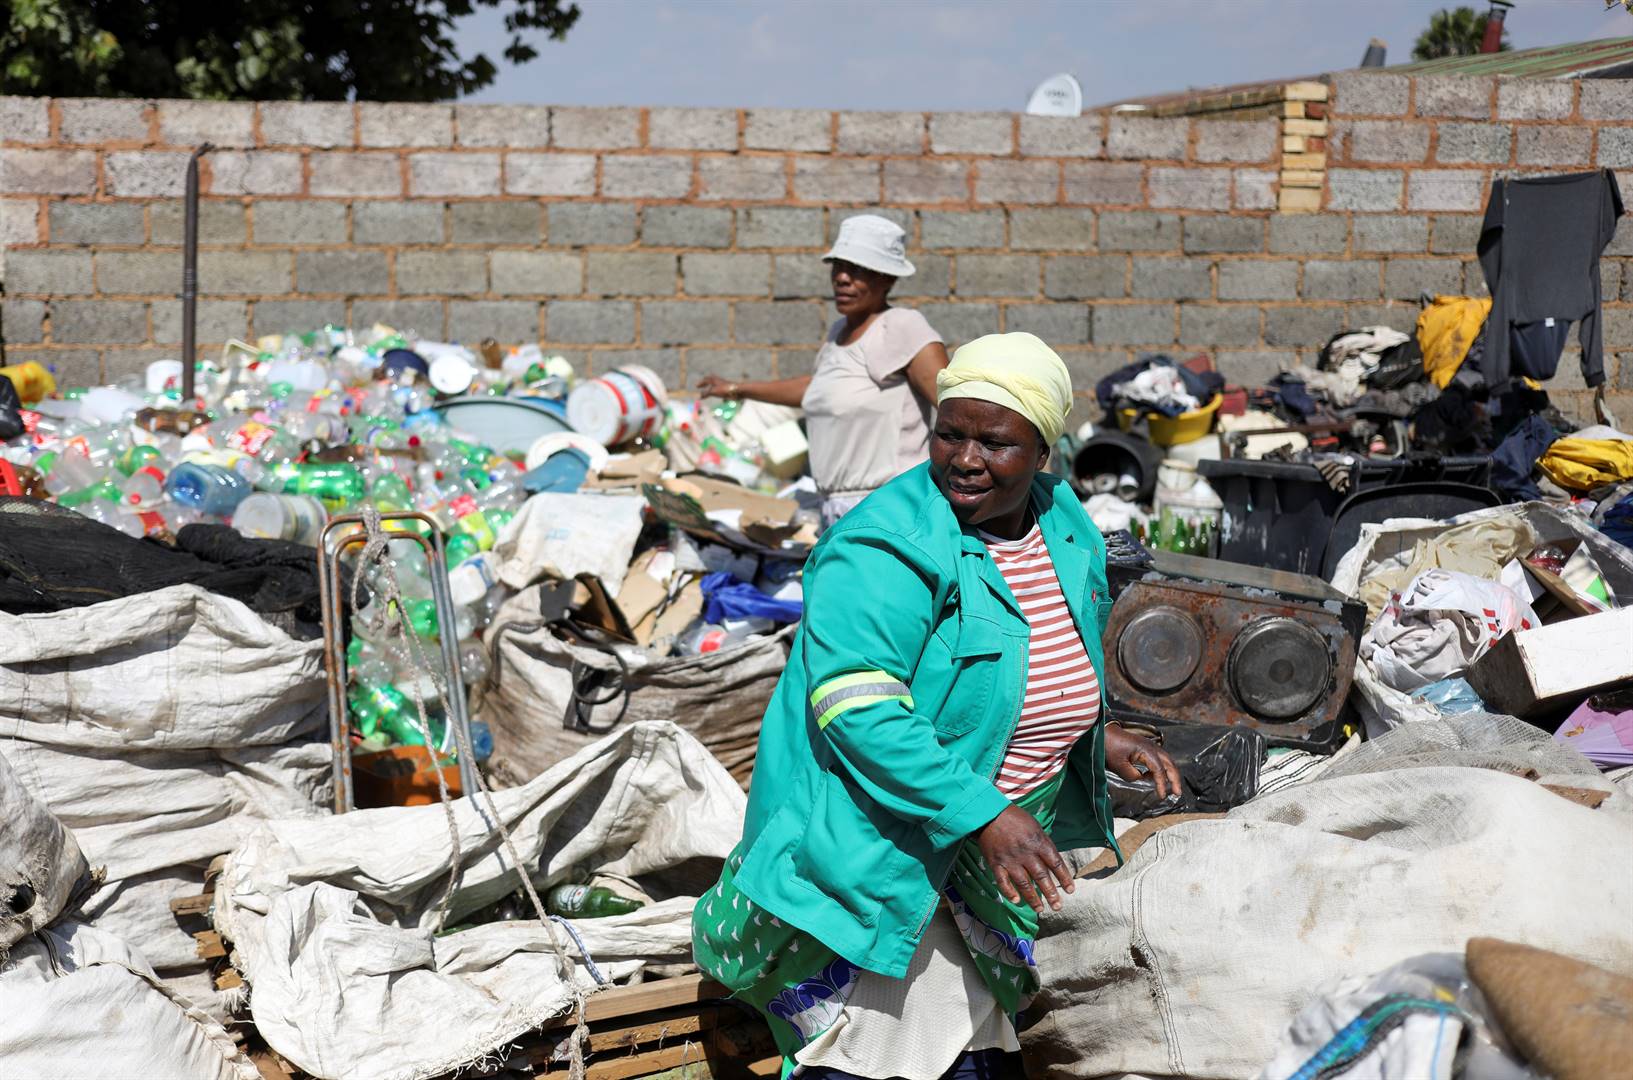 Waste pickers Abigail Kubheka and Adelina Nkopane sort out recyclable material amid the spread of the coronavirus disease in Soweto. Picture: Siphiwe Sibeko/Reuters